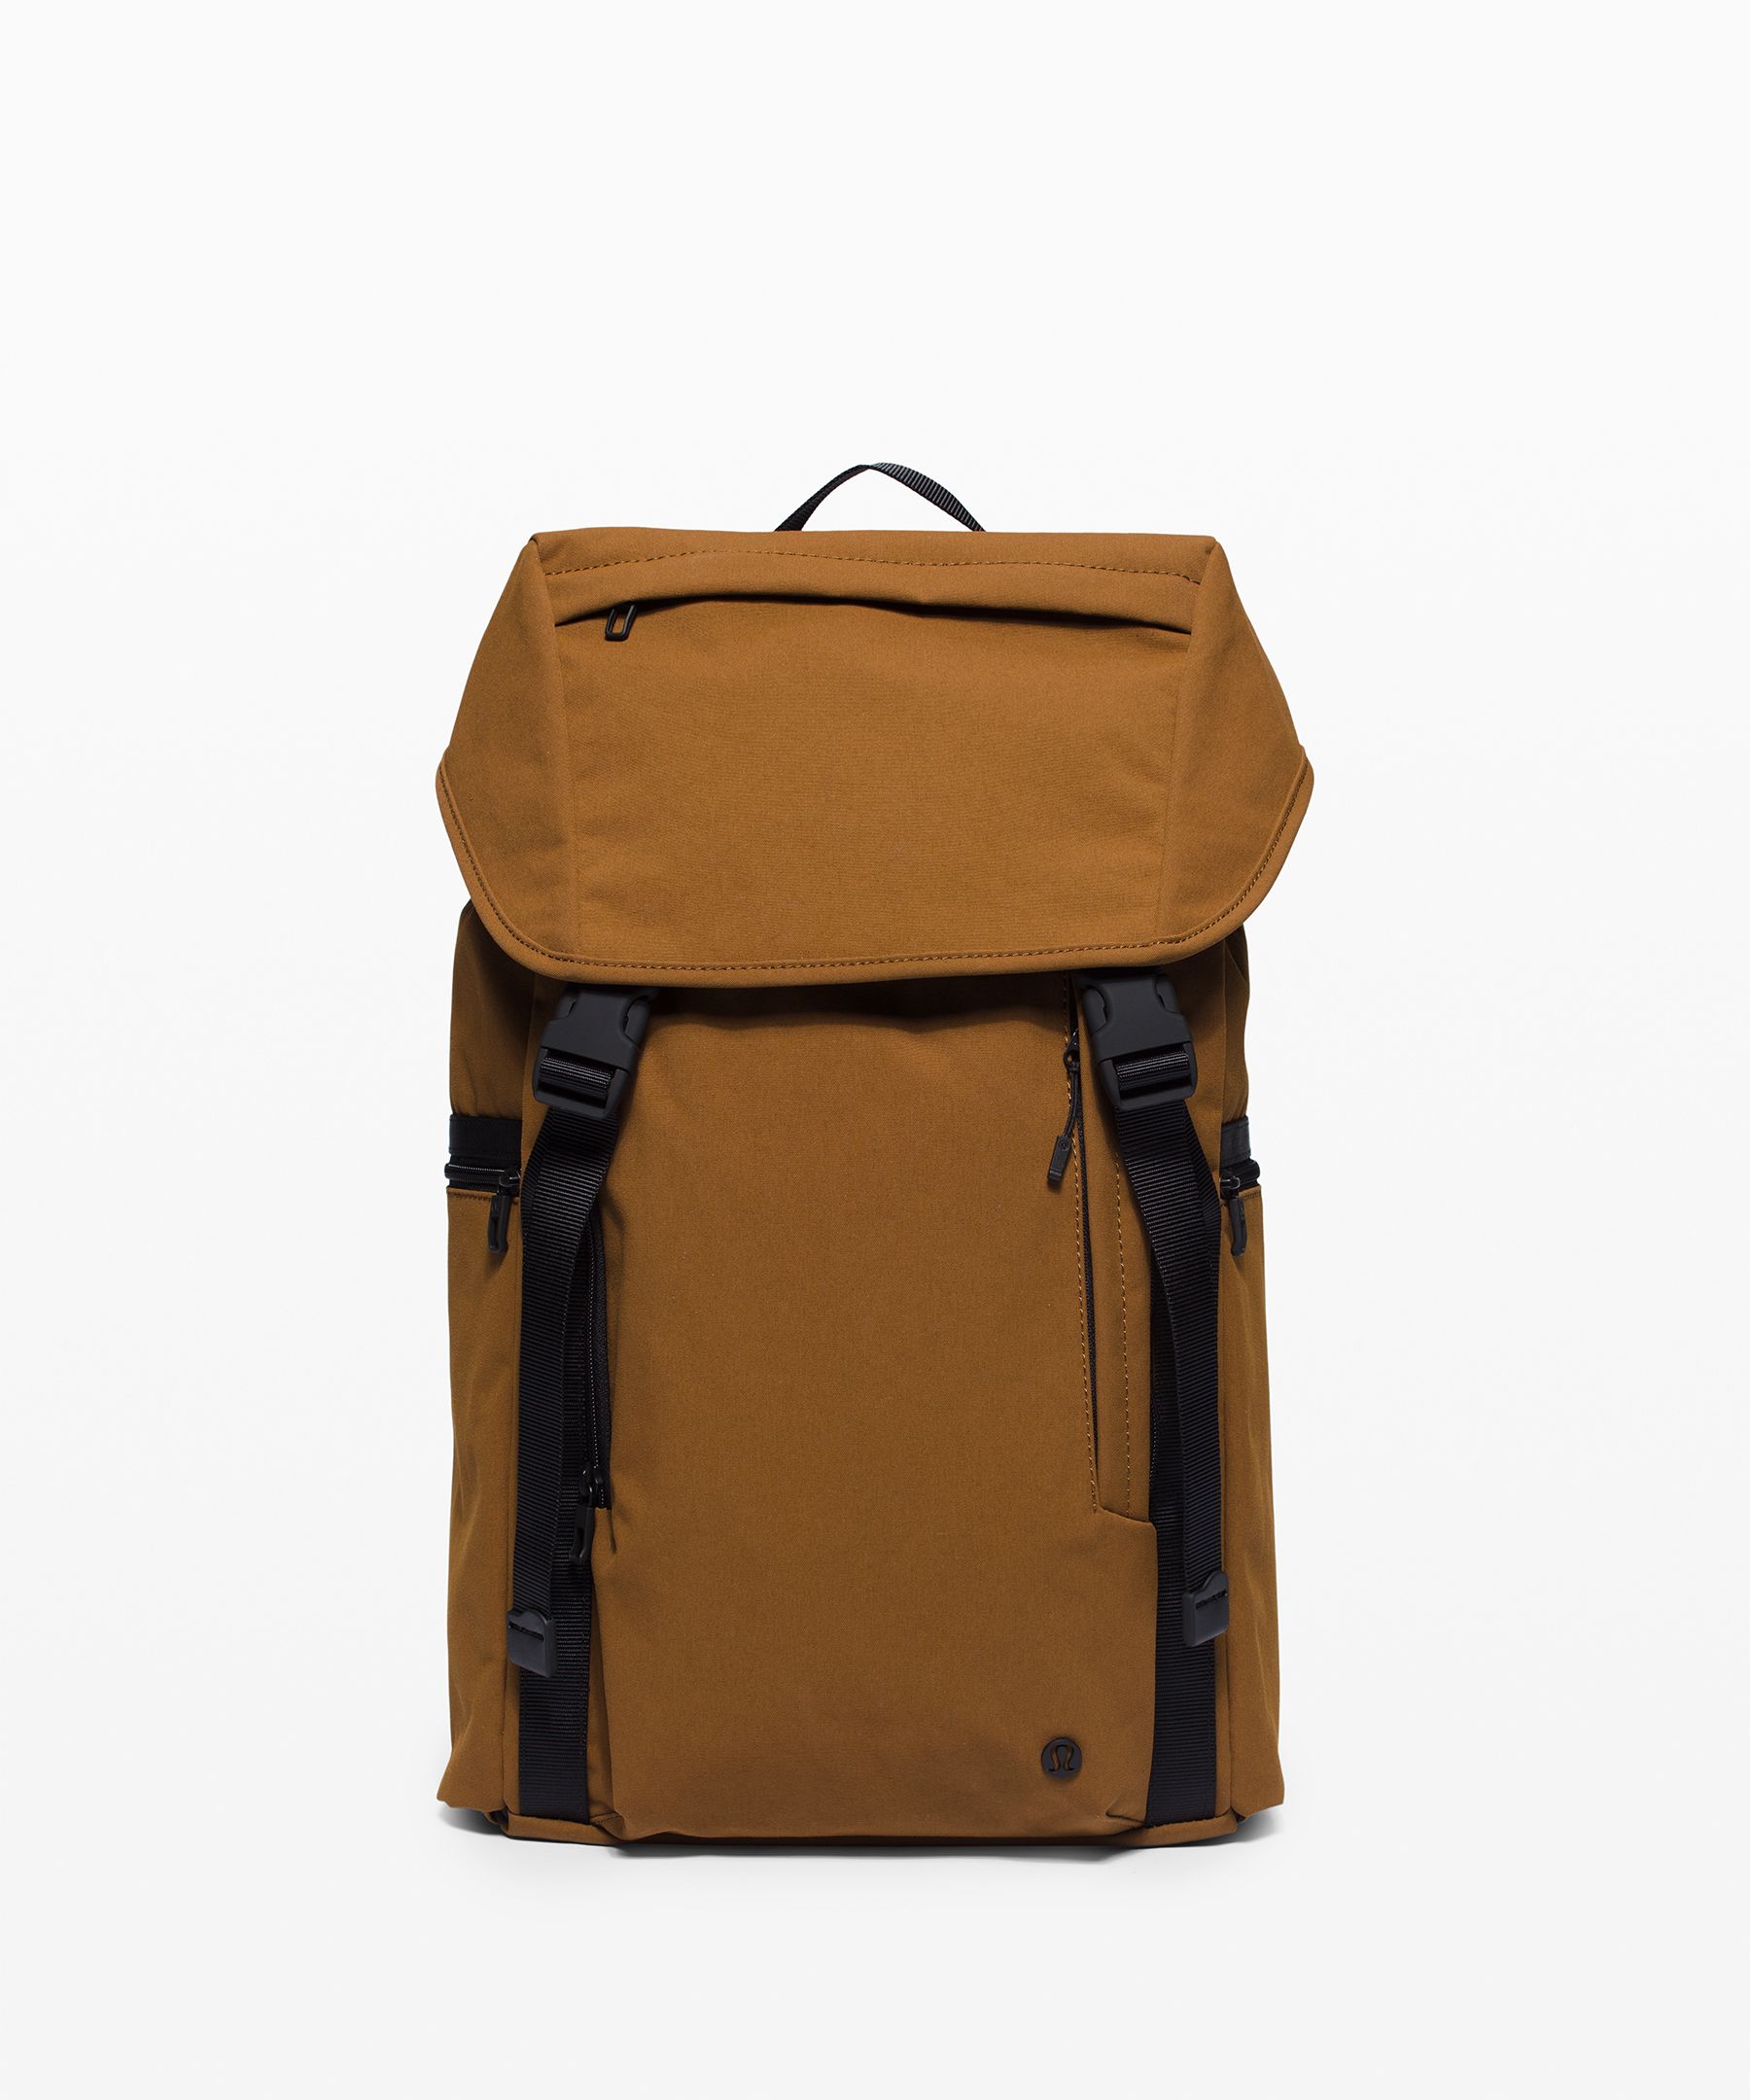 command the day backpack lululemon